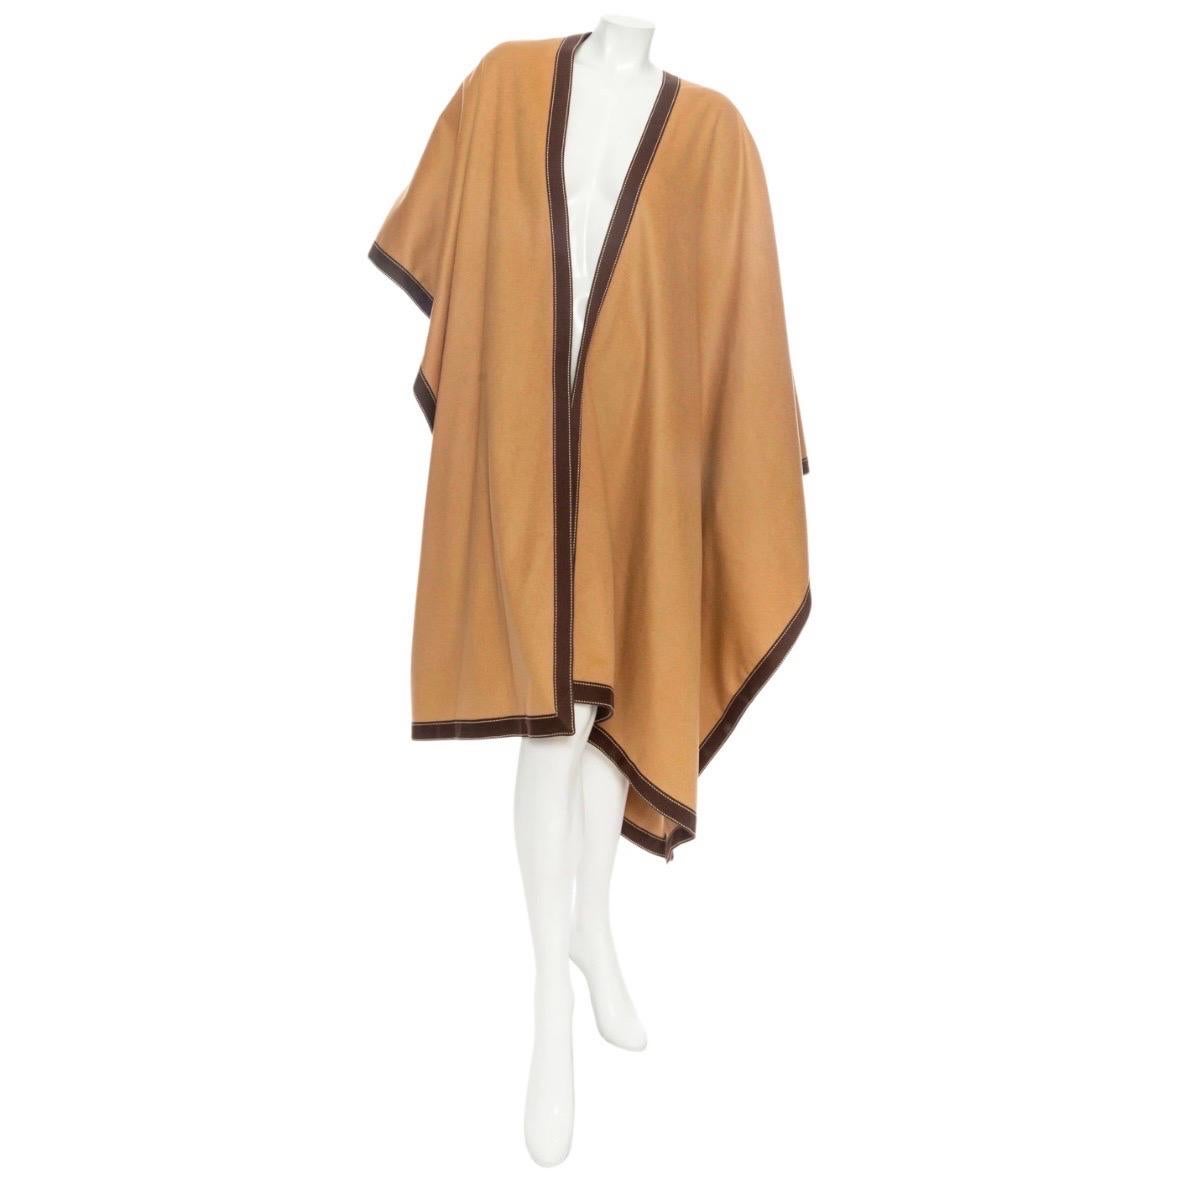 Balmain Camel Wool-Blend Contrast-Trim Draped Poncho

Fall 2020 Collection by Olivier Rousteing
Camel/Brown
Reversible
Open sides
Asymmetrical
Made in Bulgaria
97% wool, 3% cashmere
New with tags; excellent condition
Size & Measurements
Approximate,